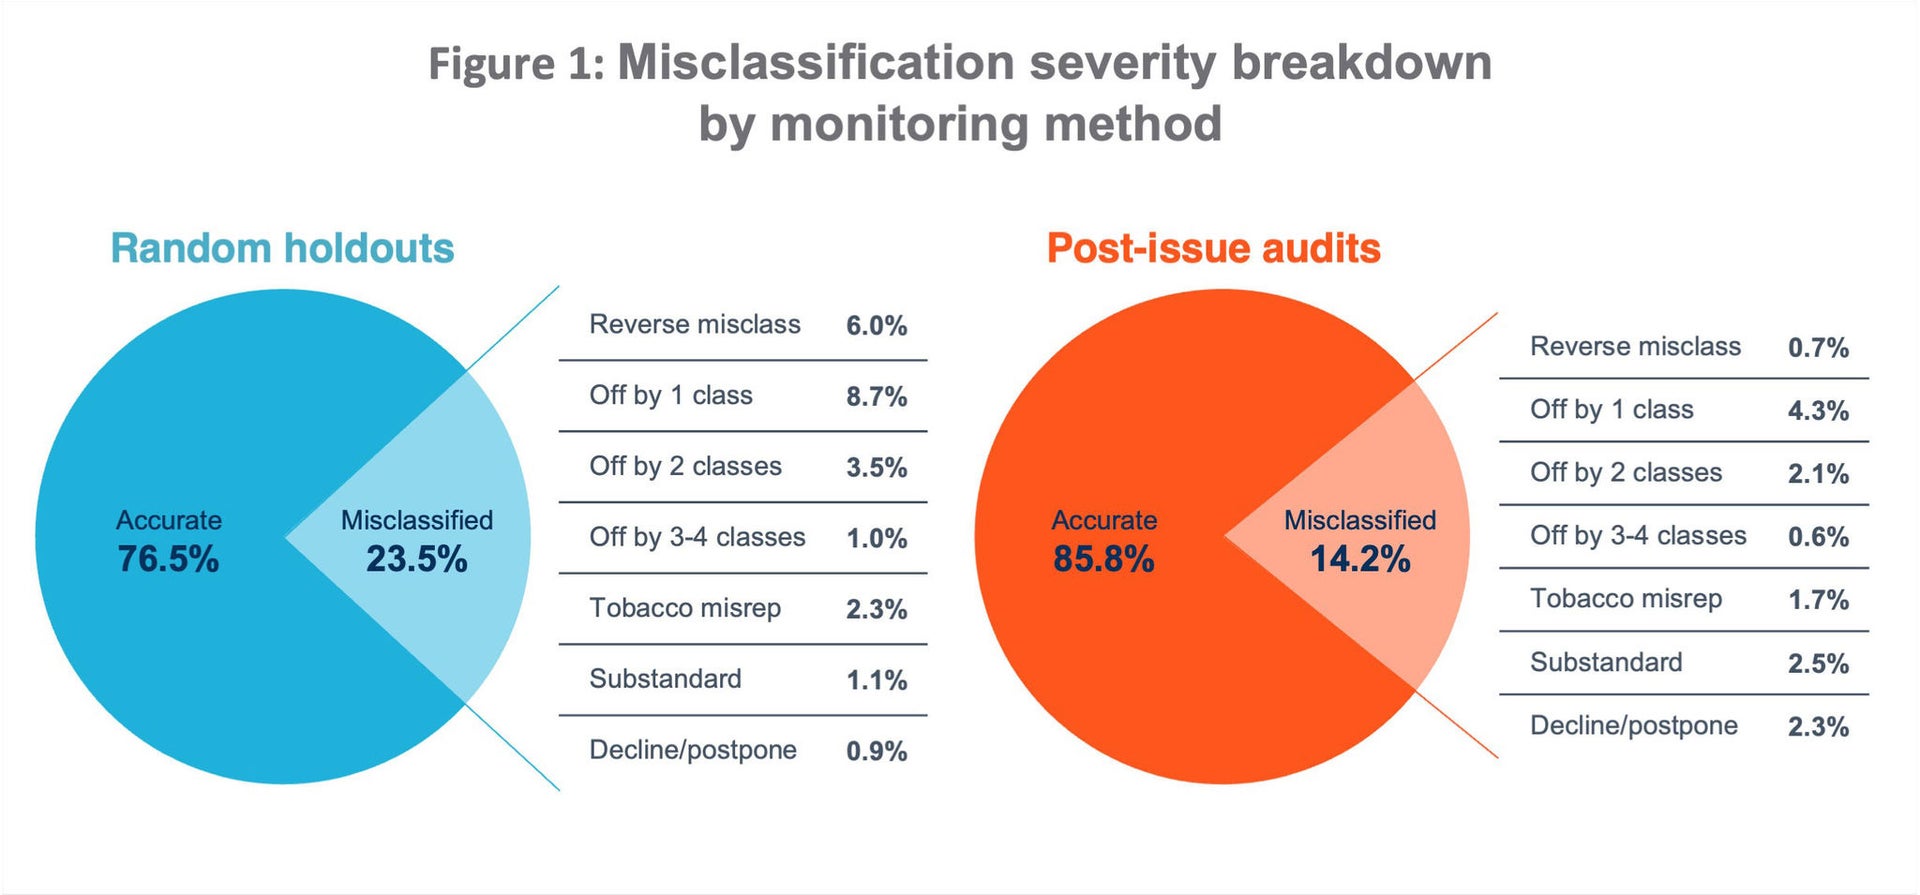 Graphic pie chart showing the misclassification severity breakdown by monitoring method